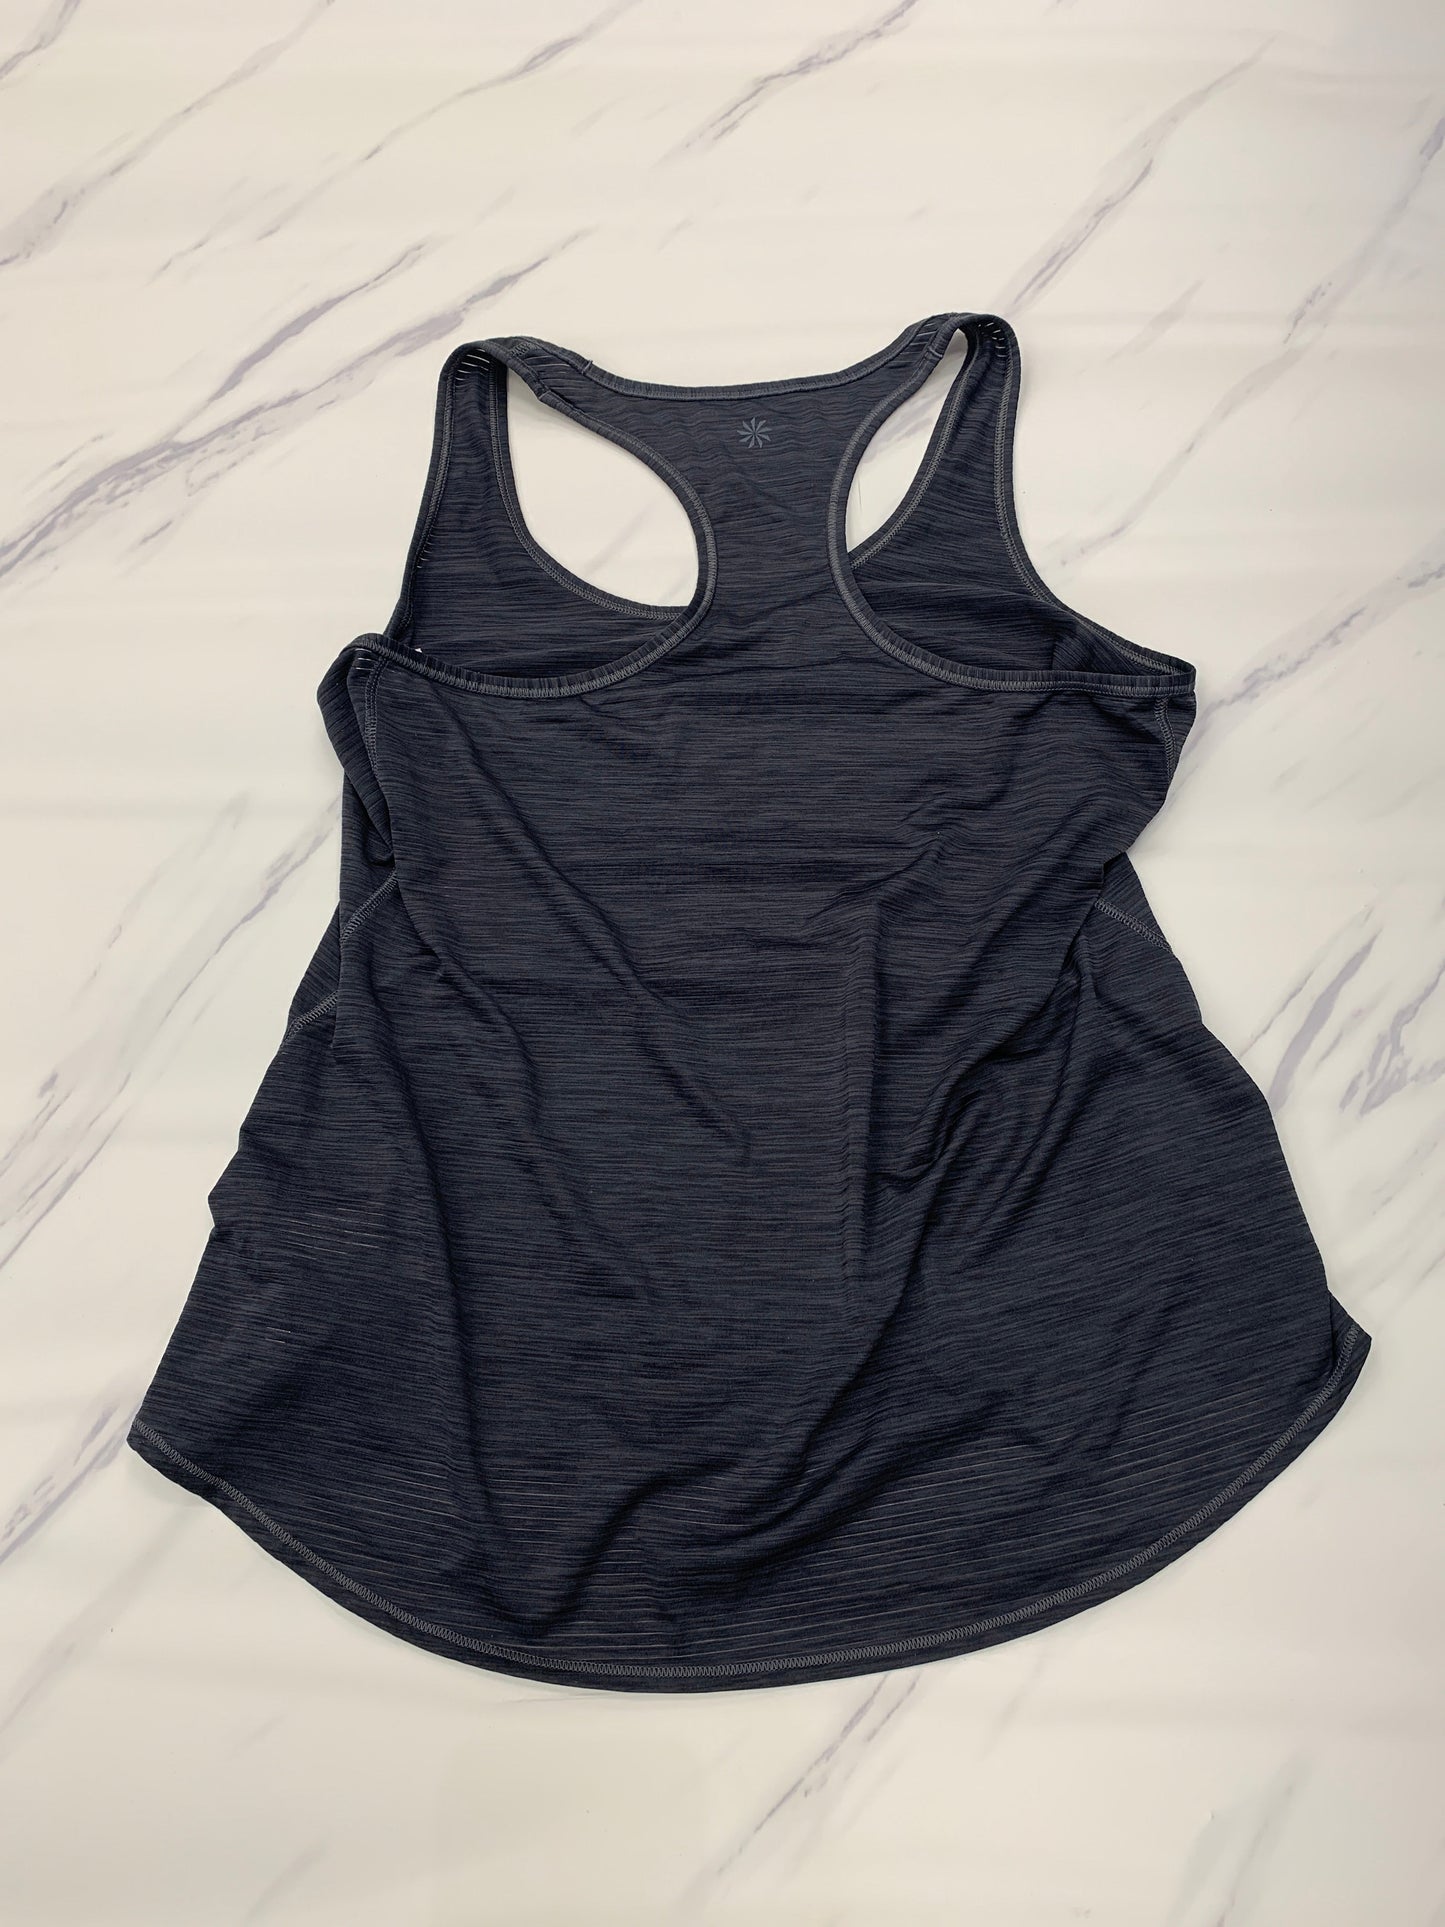 Athletic Tank Top By Athleta  Size: L